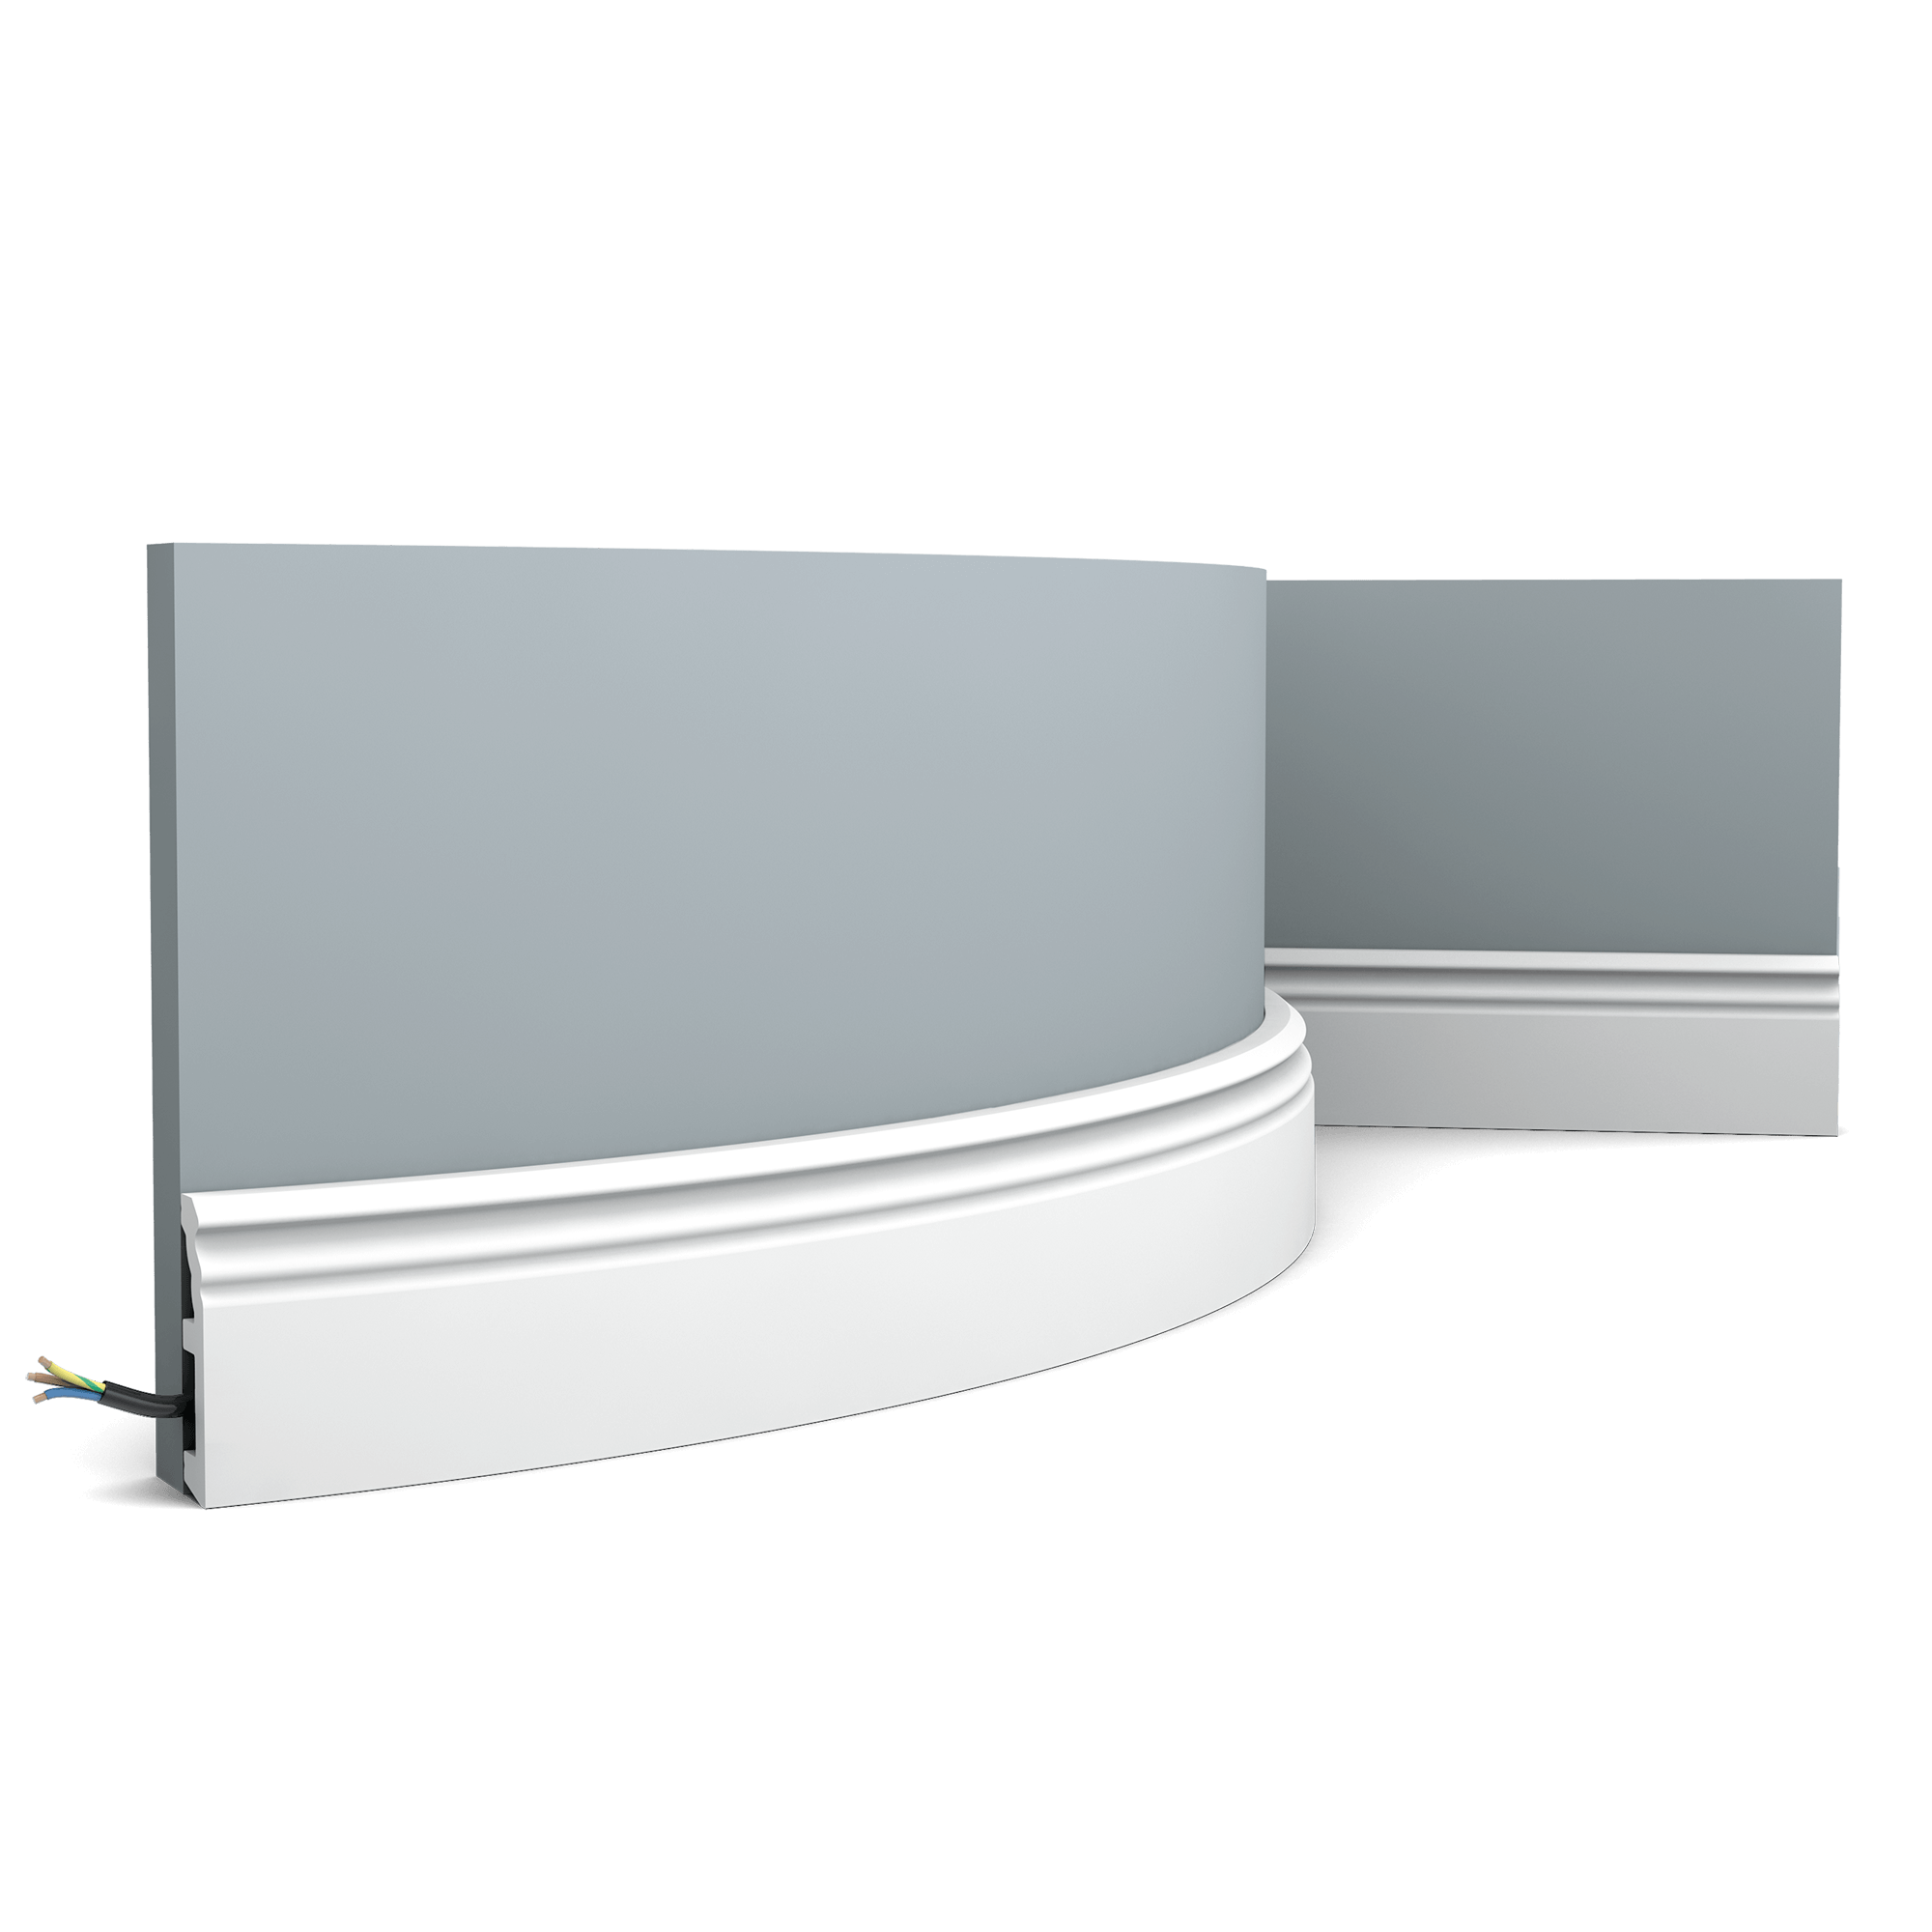 The flexible version of the SX195. The SX195 HAMBURG is a timeless skirting board. Its unique shape with a rich history provides your wall with an elegant finish. Flex Radius: R min = 30 cm